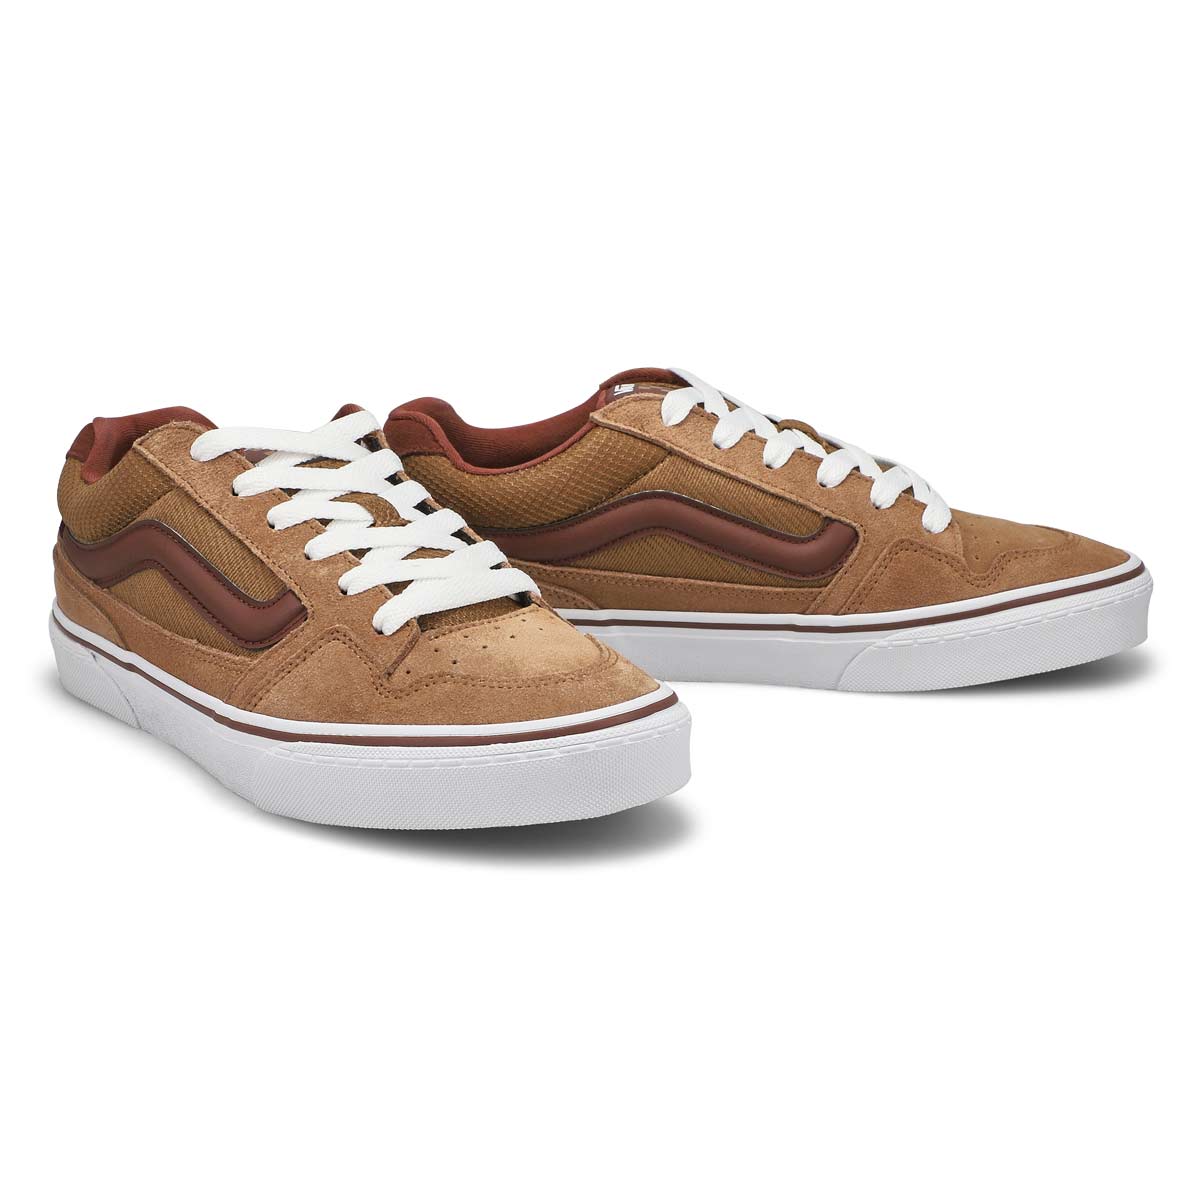 Men's Caldrone Lace Up Sneaker - Brown